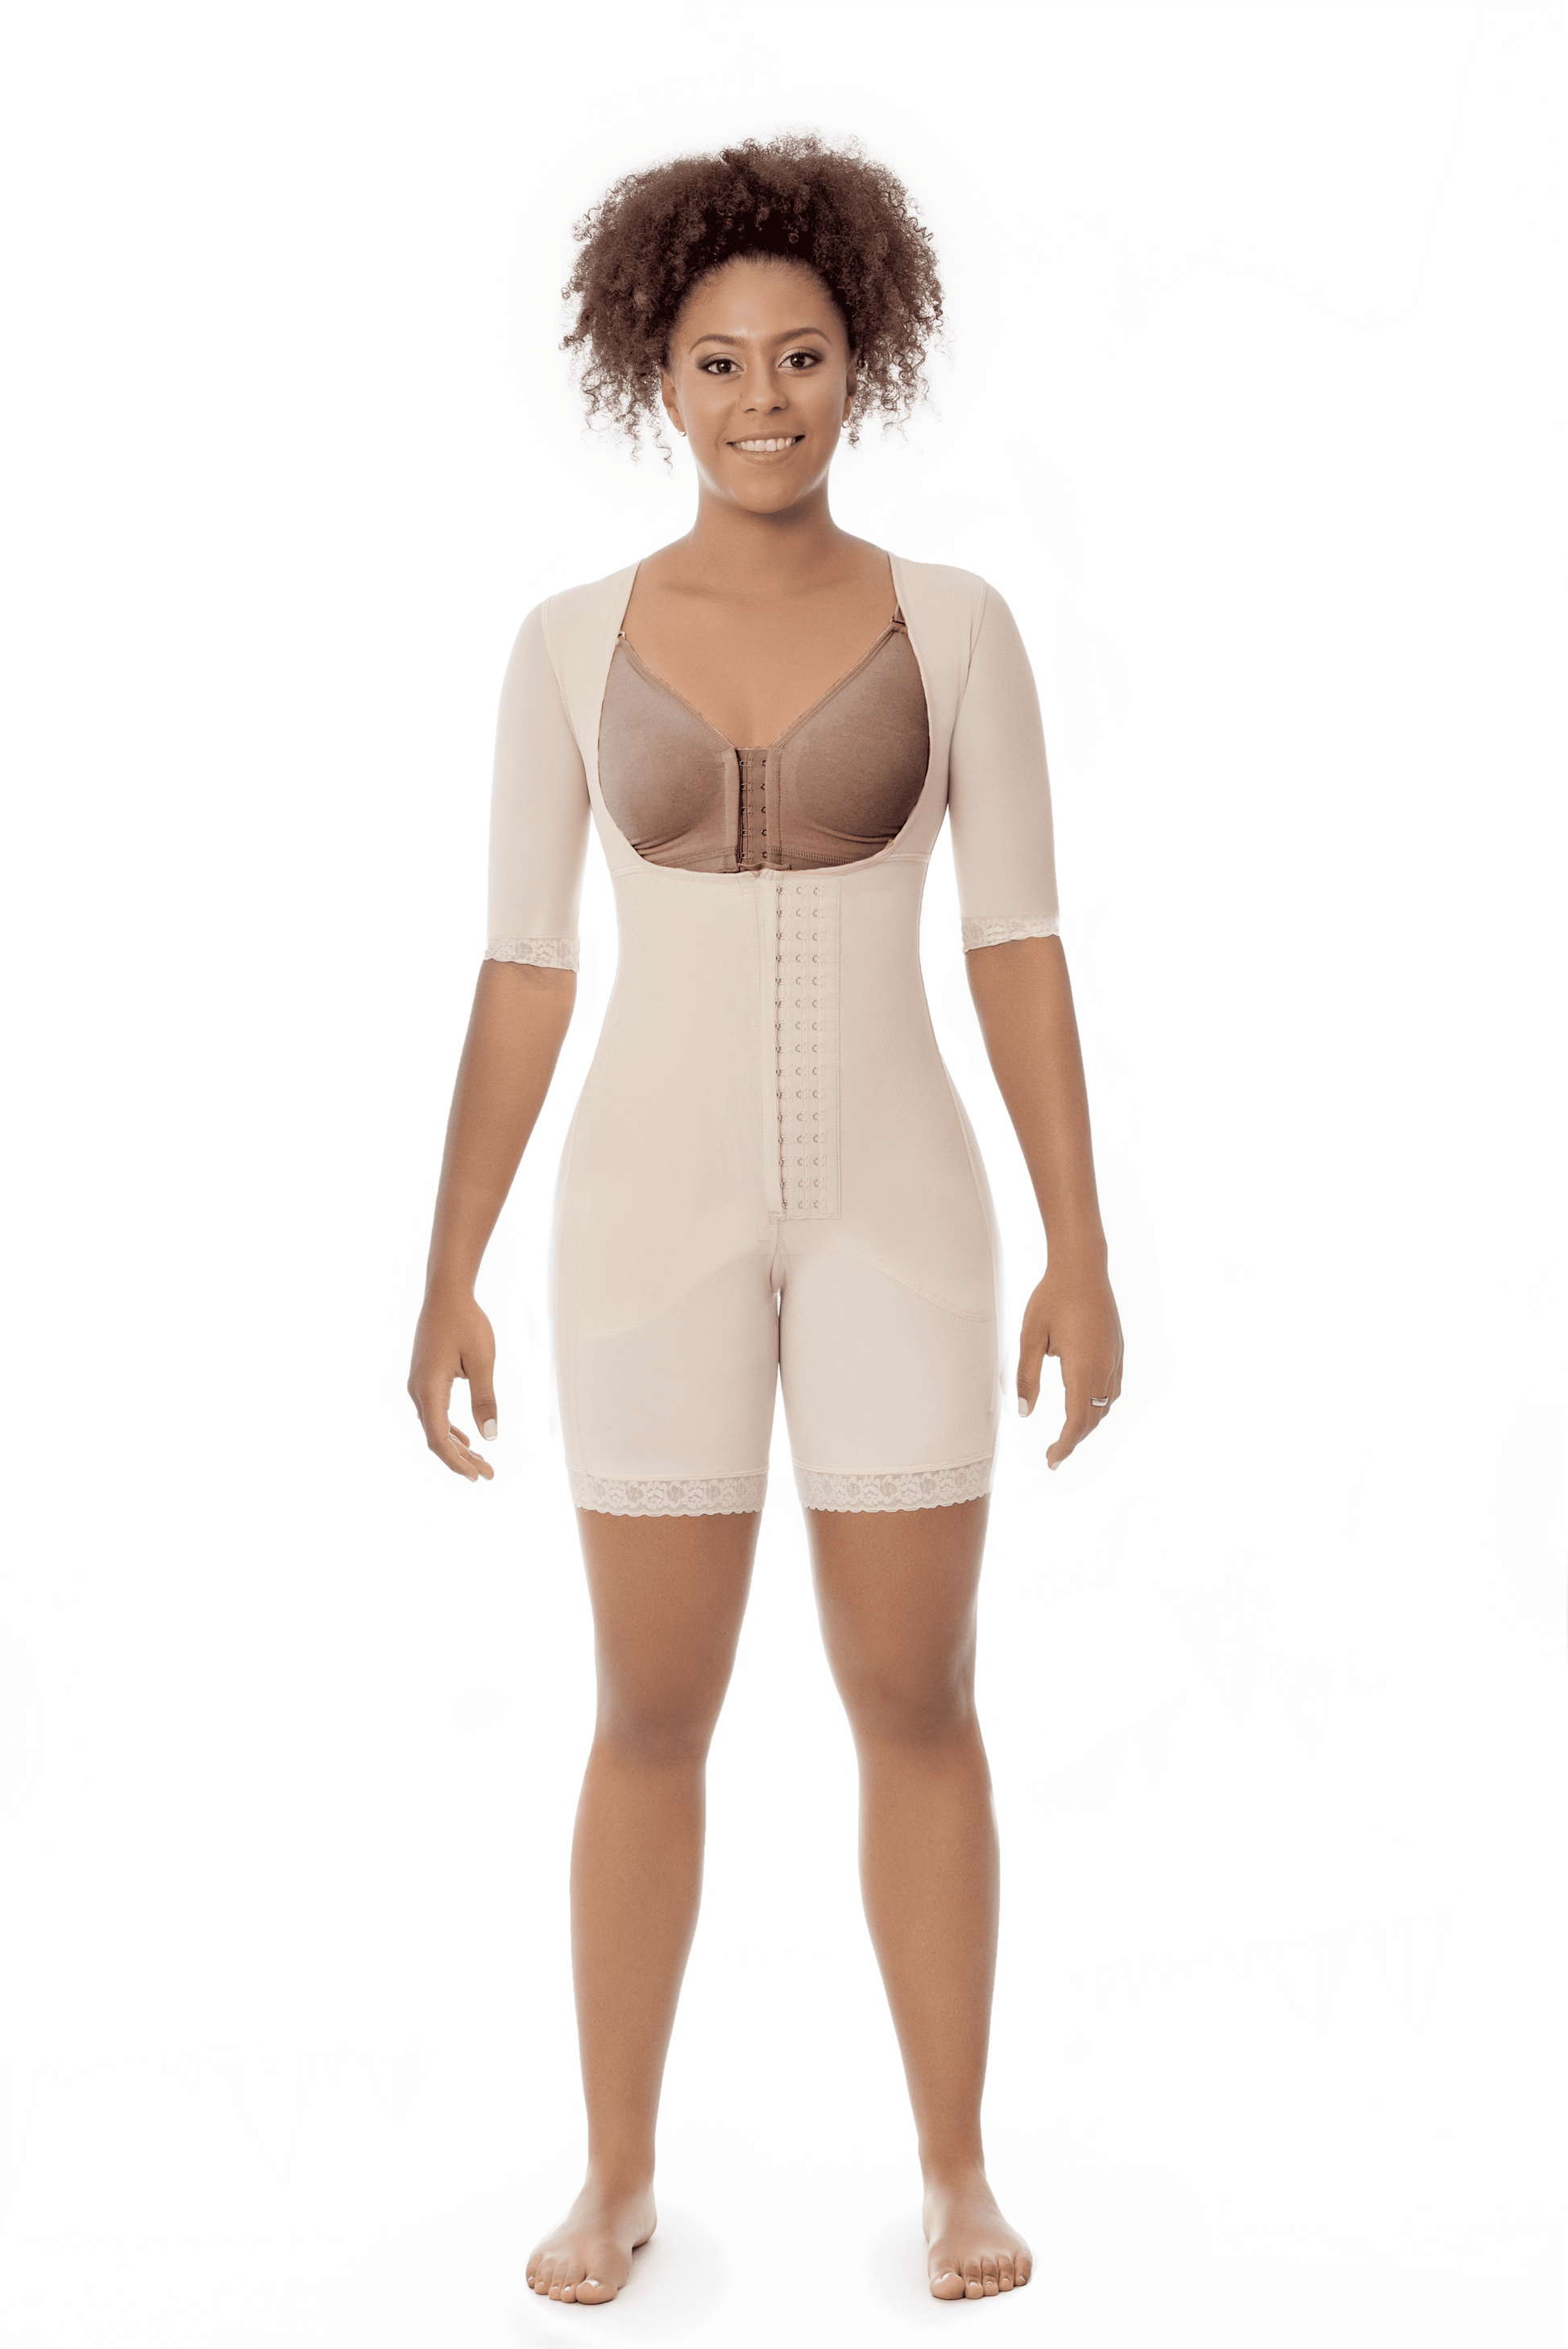 11512 - STAGE 1 BRALESS FULL BODY MID THIGH FAJA WITH SLEEVES